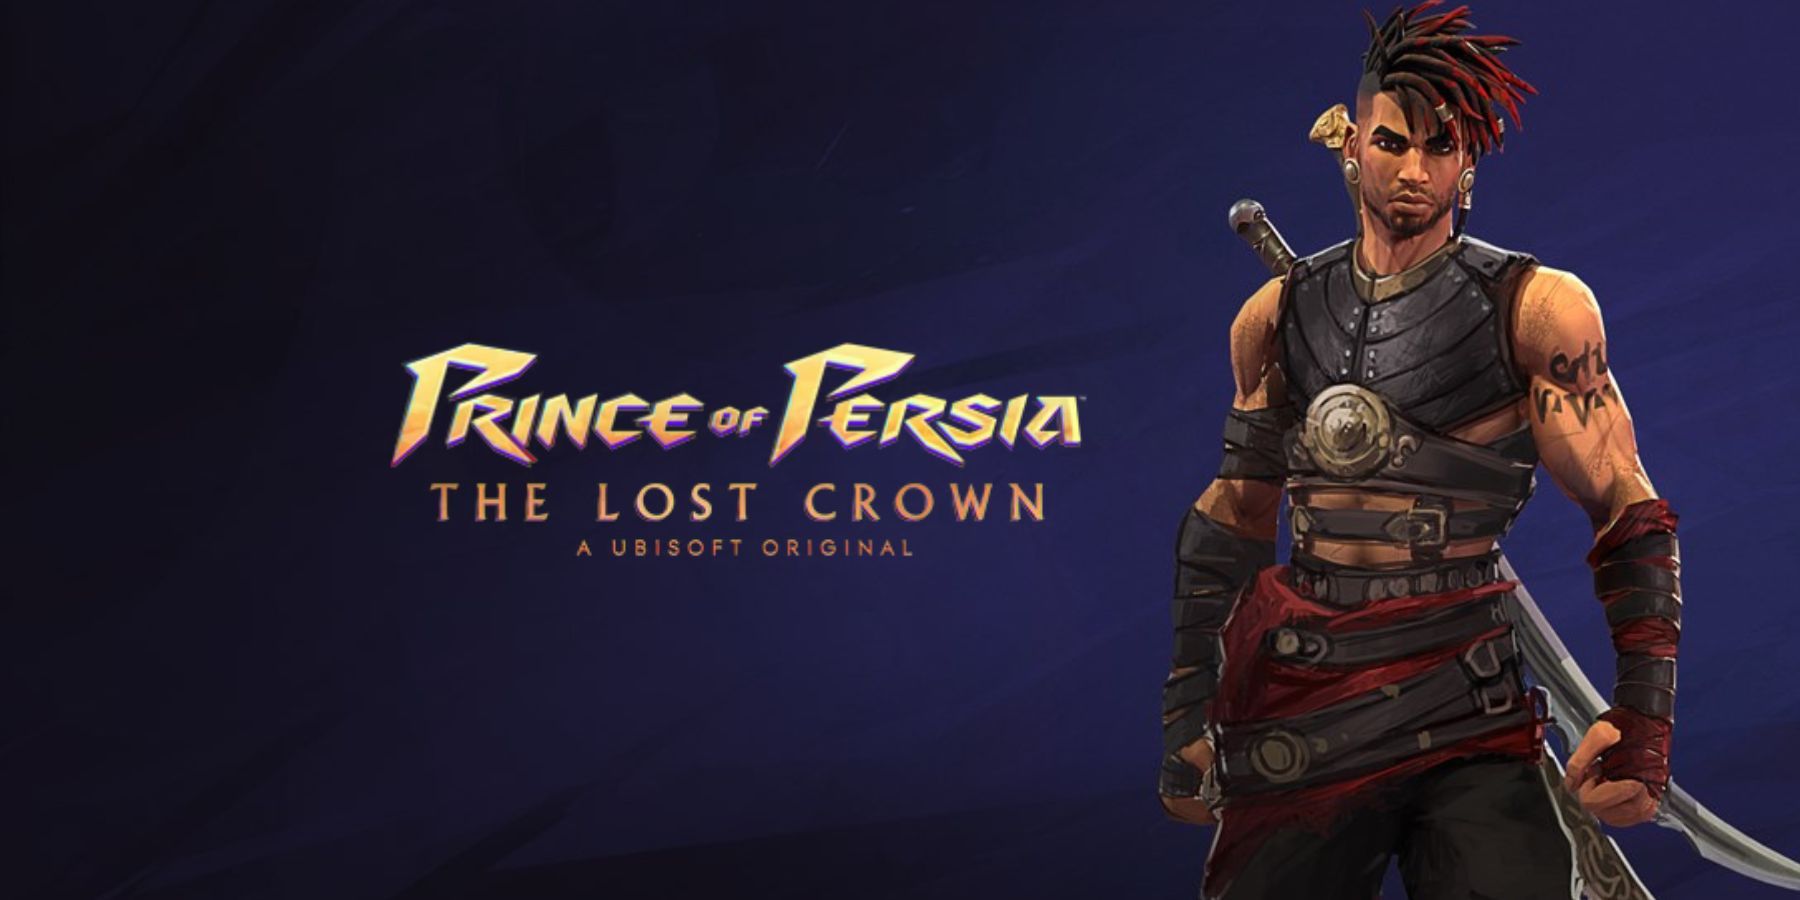 Poll: Are you excited for Prince of Persia The Lost Crown on PS5?